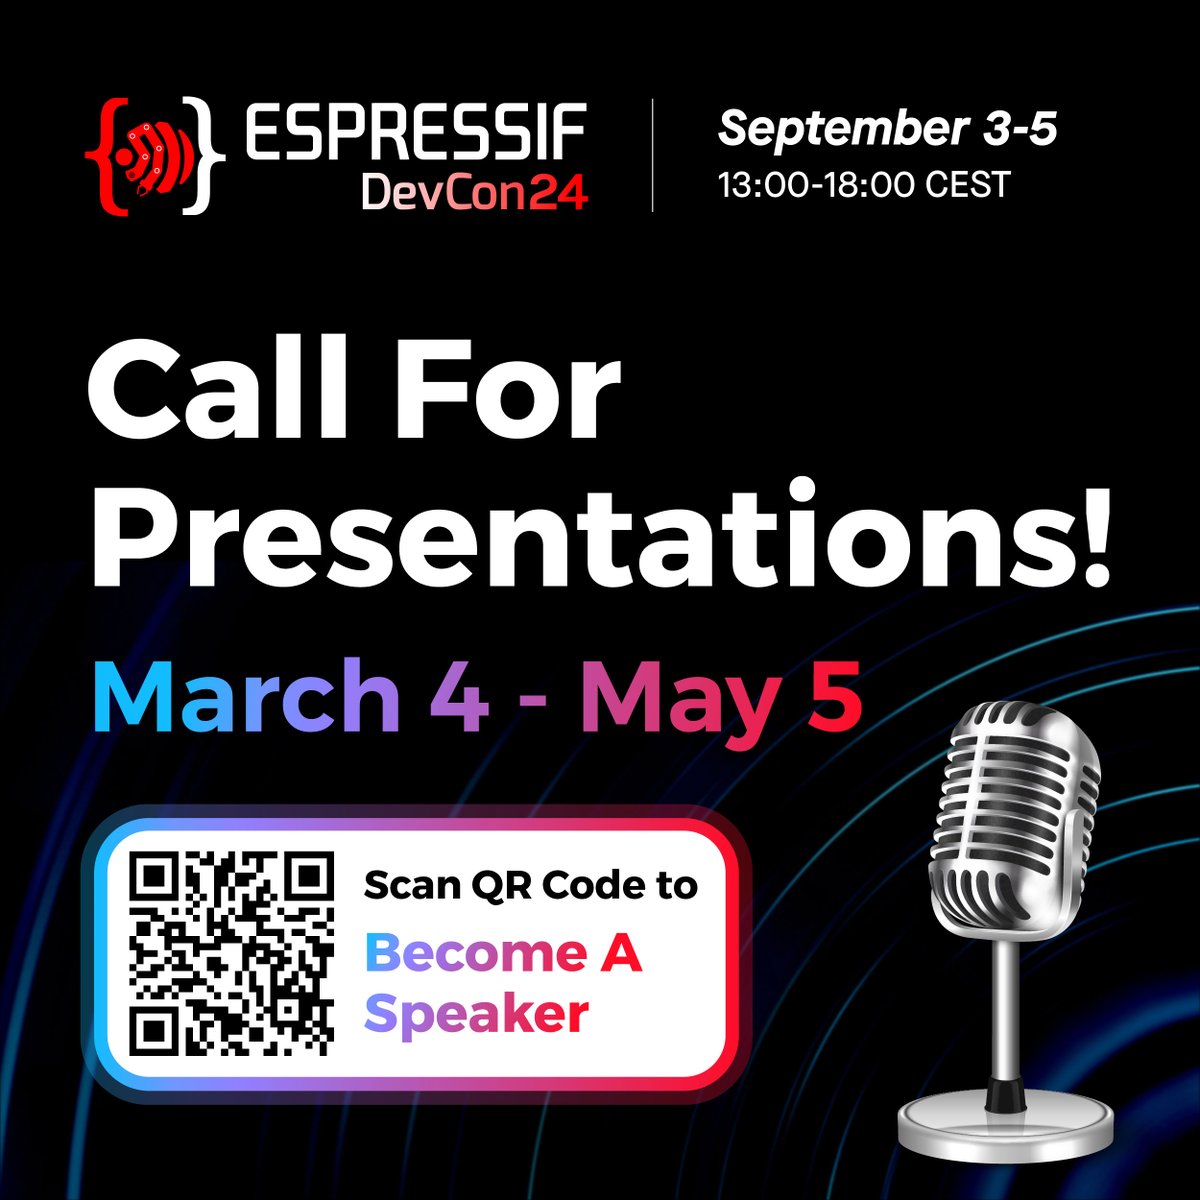 Call for Presentations is Now Open for DevCon24! 🚀 Don't miss this opportunity to showcase your work, connect with fellow IoT innovators, and contribute to the vibrant discourse at DevCon24. Submit your presentation proposal today and be a part of something extraordinary! For